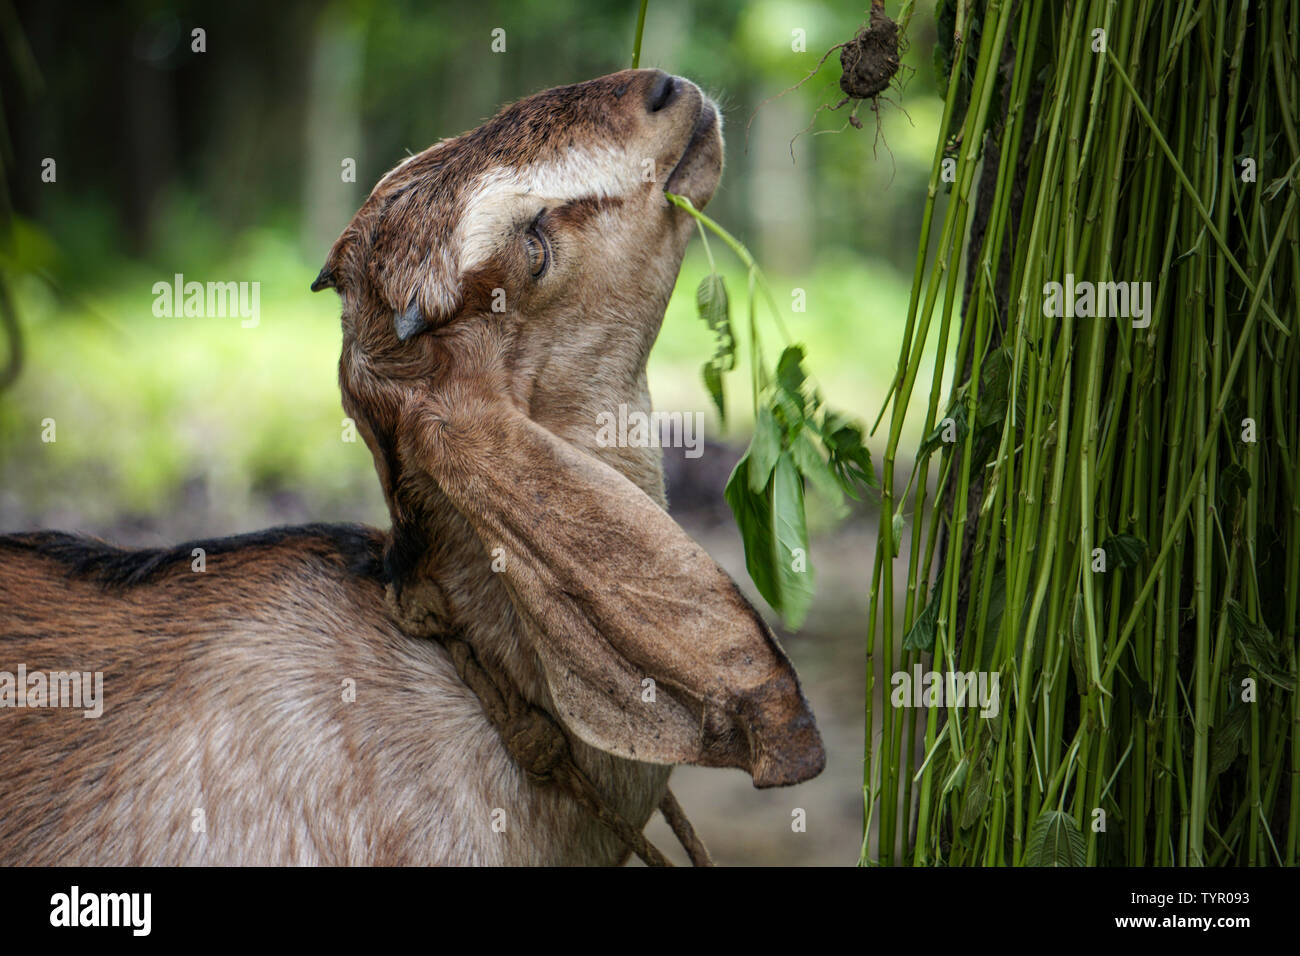 The goats eating hanging grass on the tree. Stock Photo